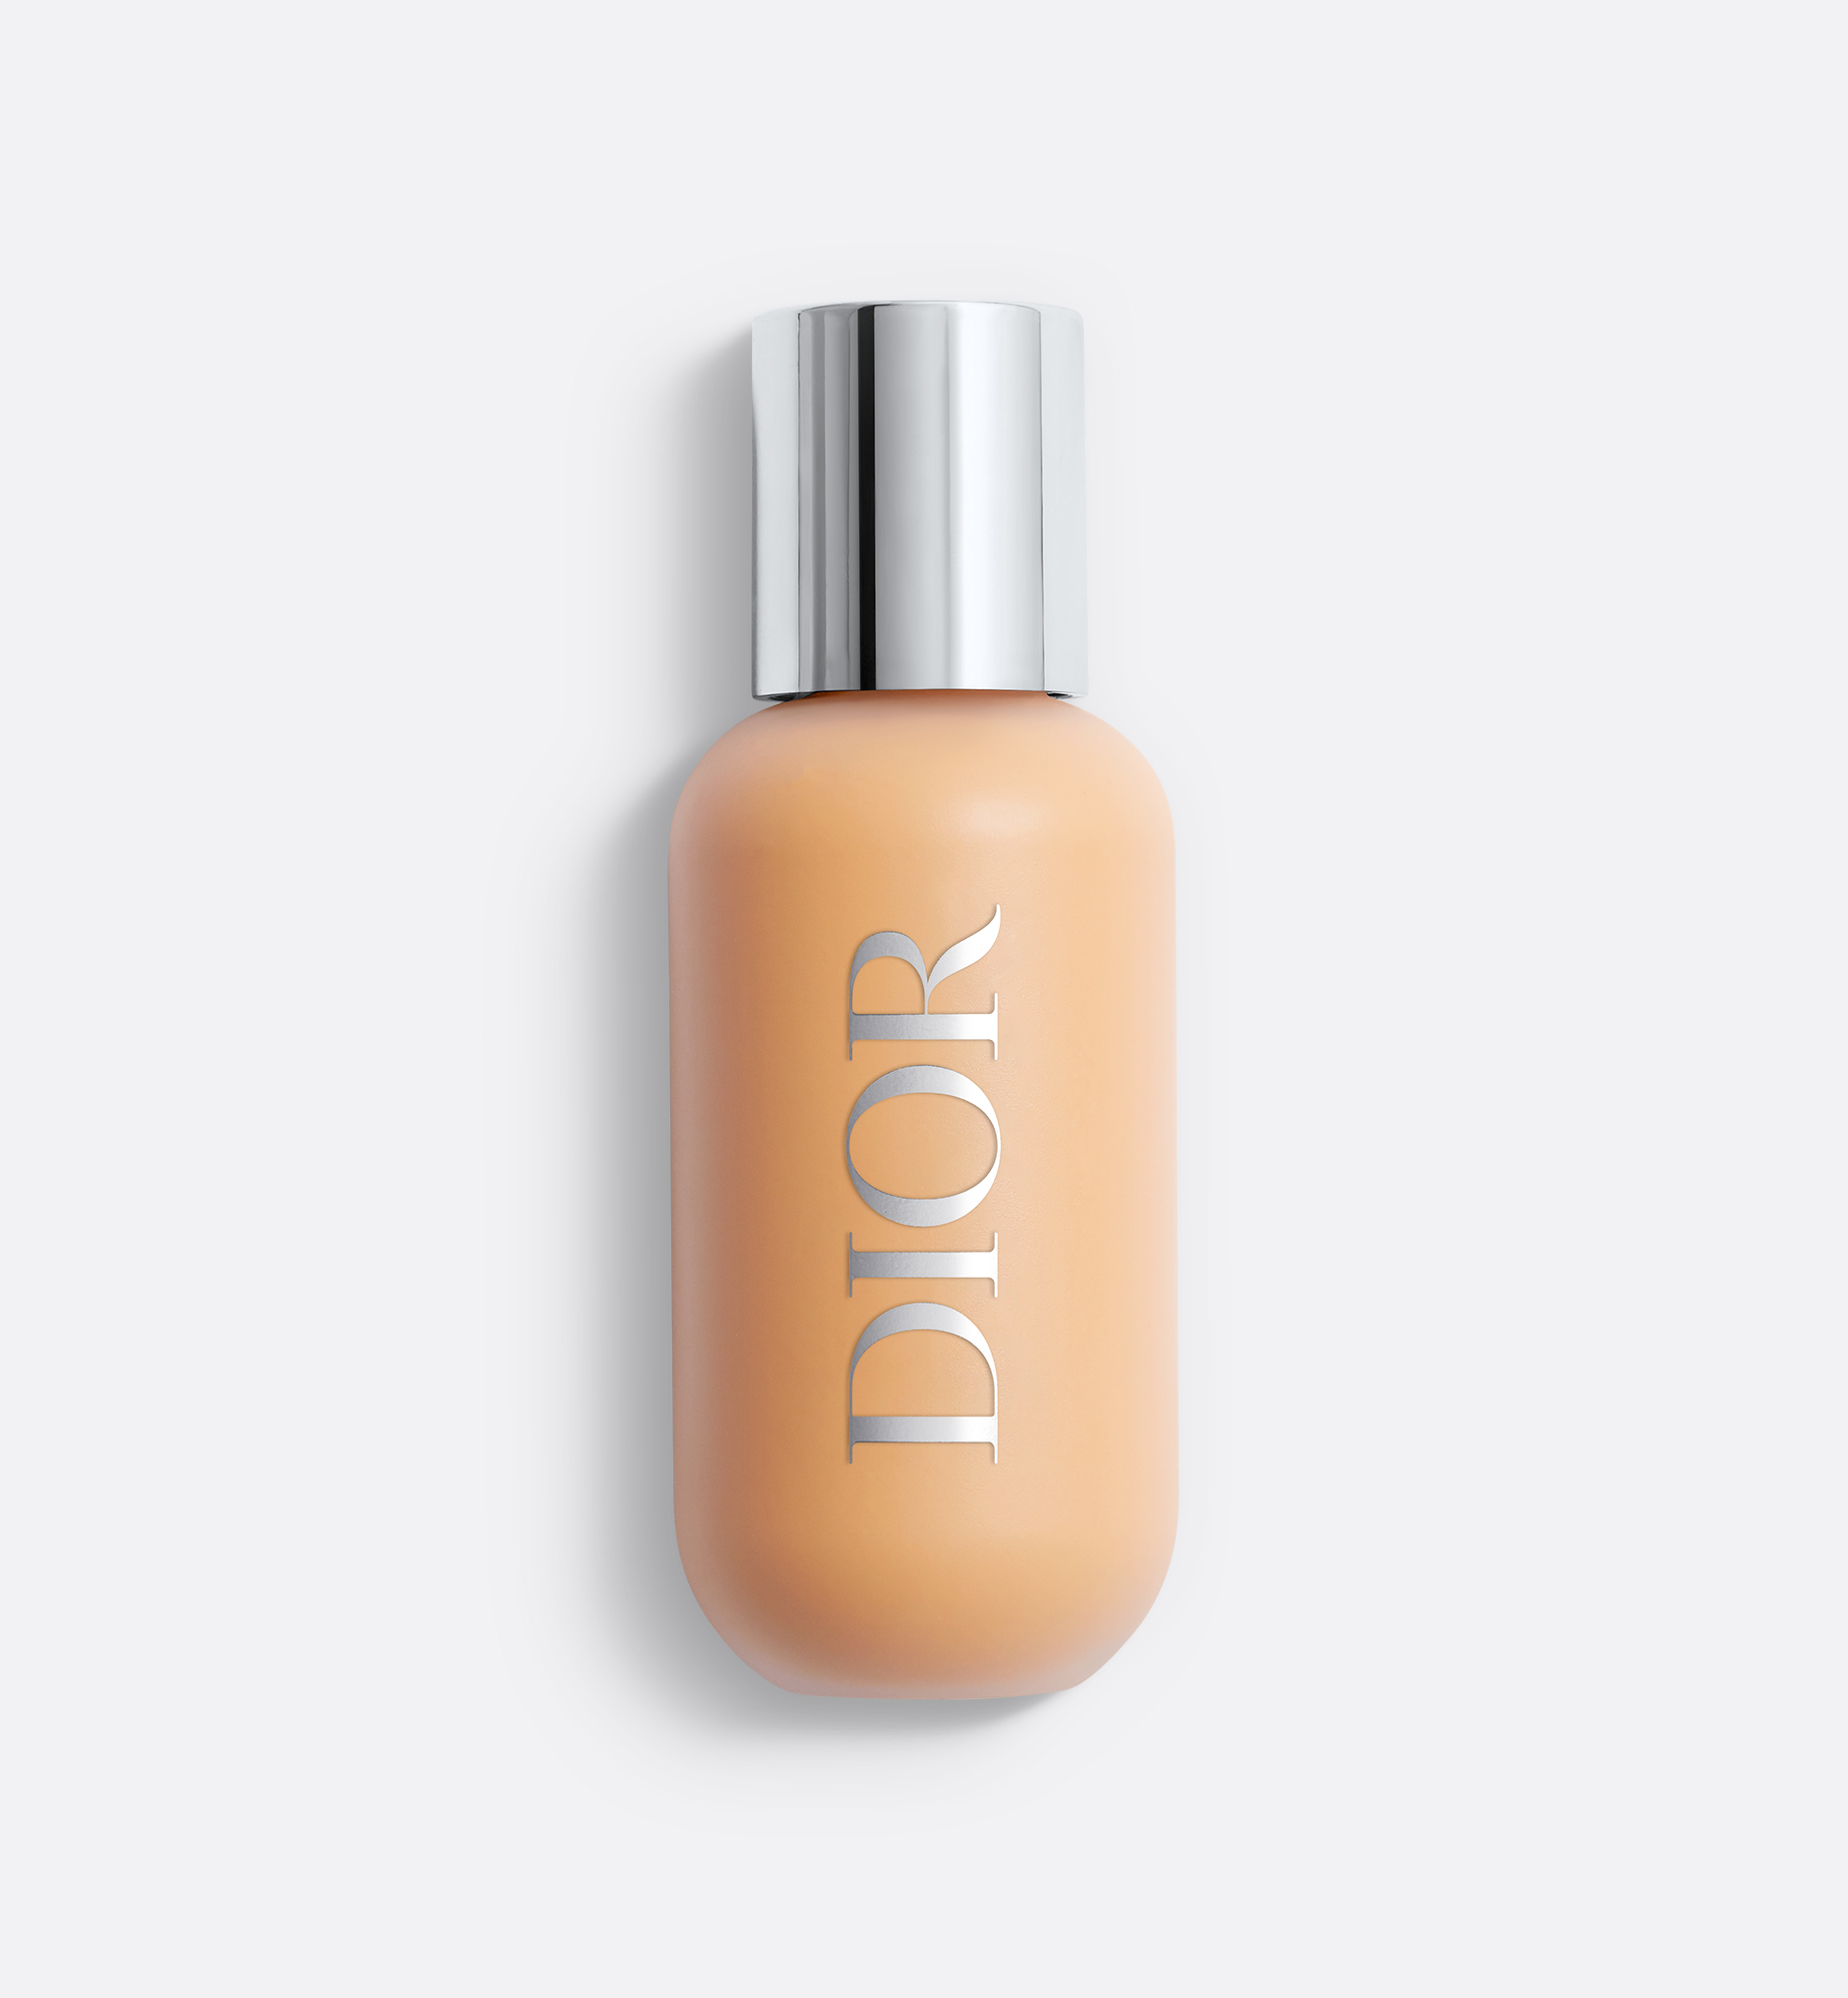 Dior Face And Body Foundation